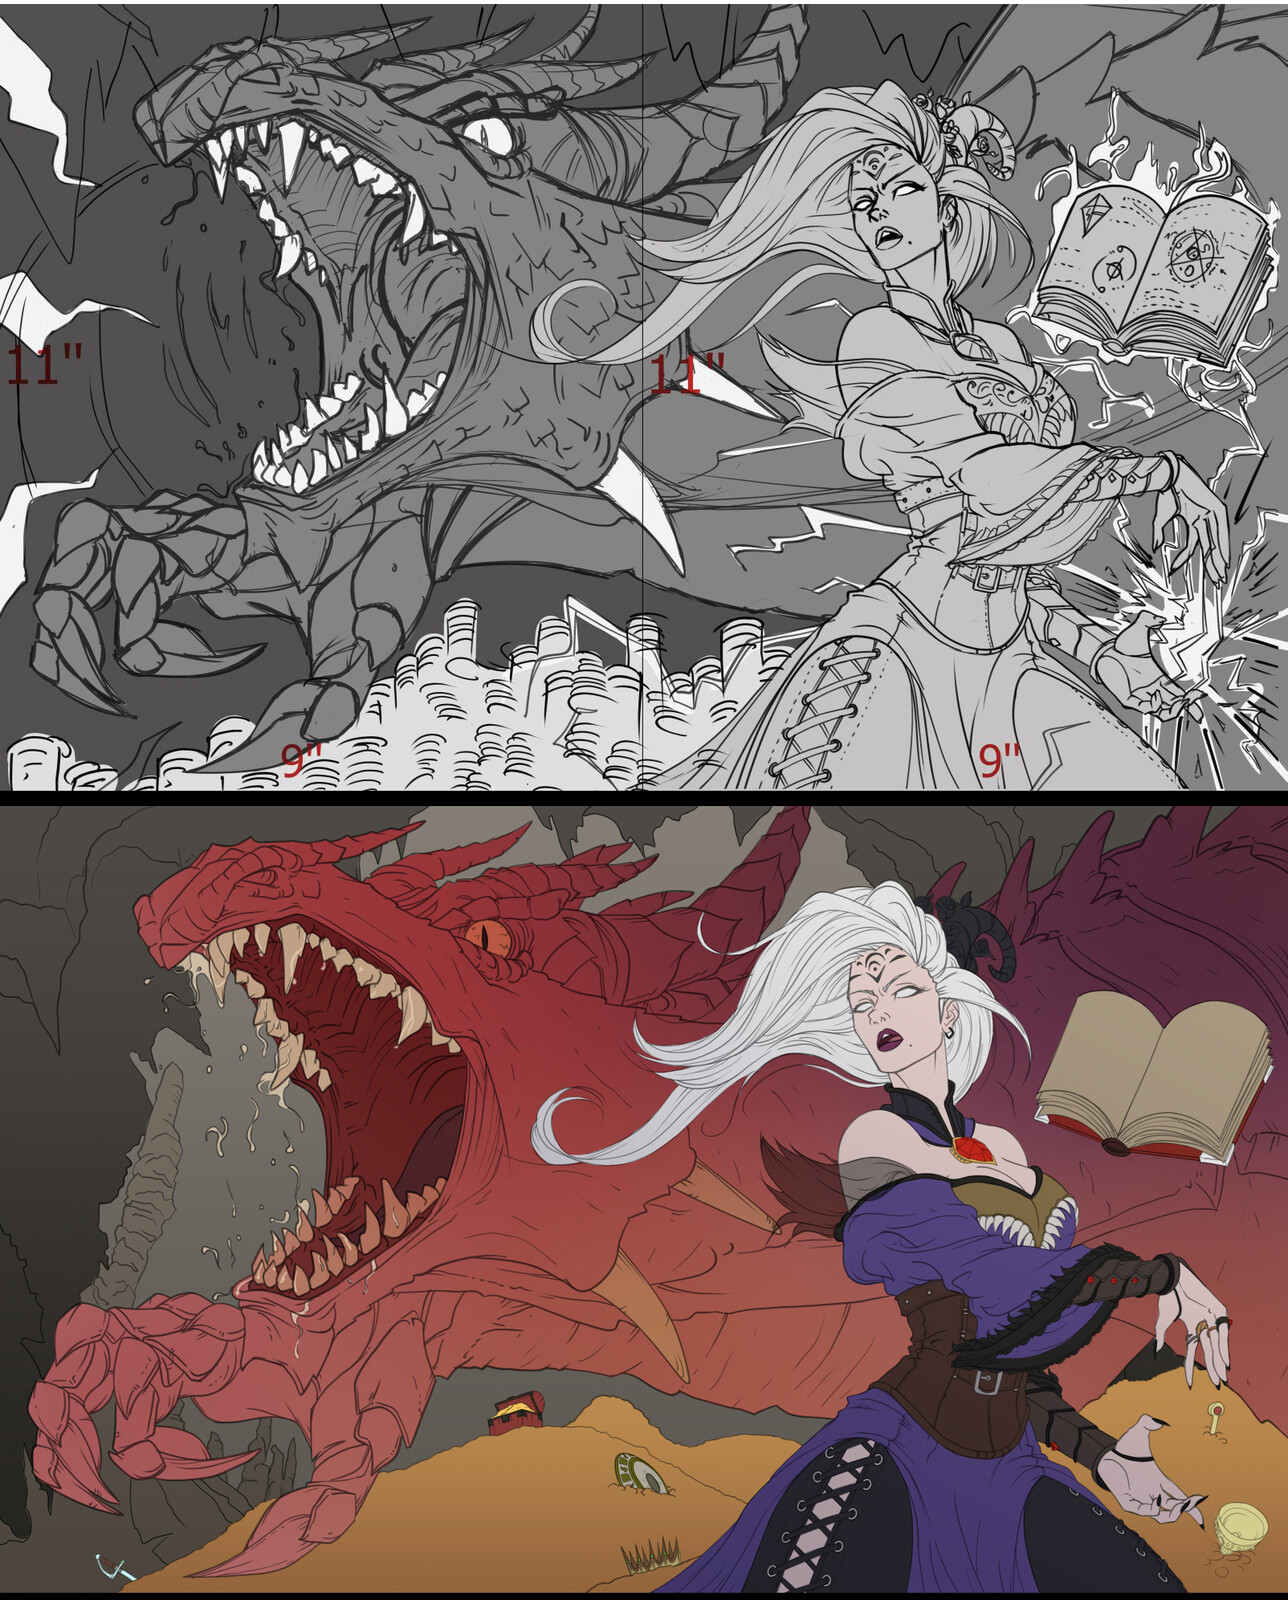 Part of the process, sketch and some coloring.